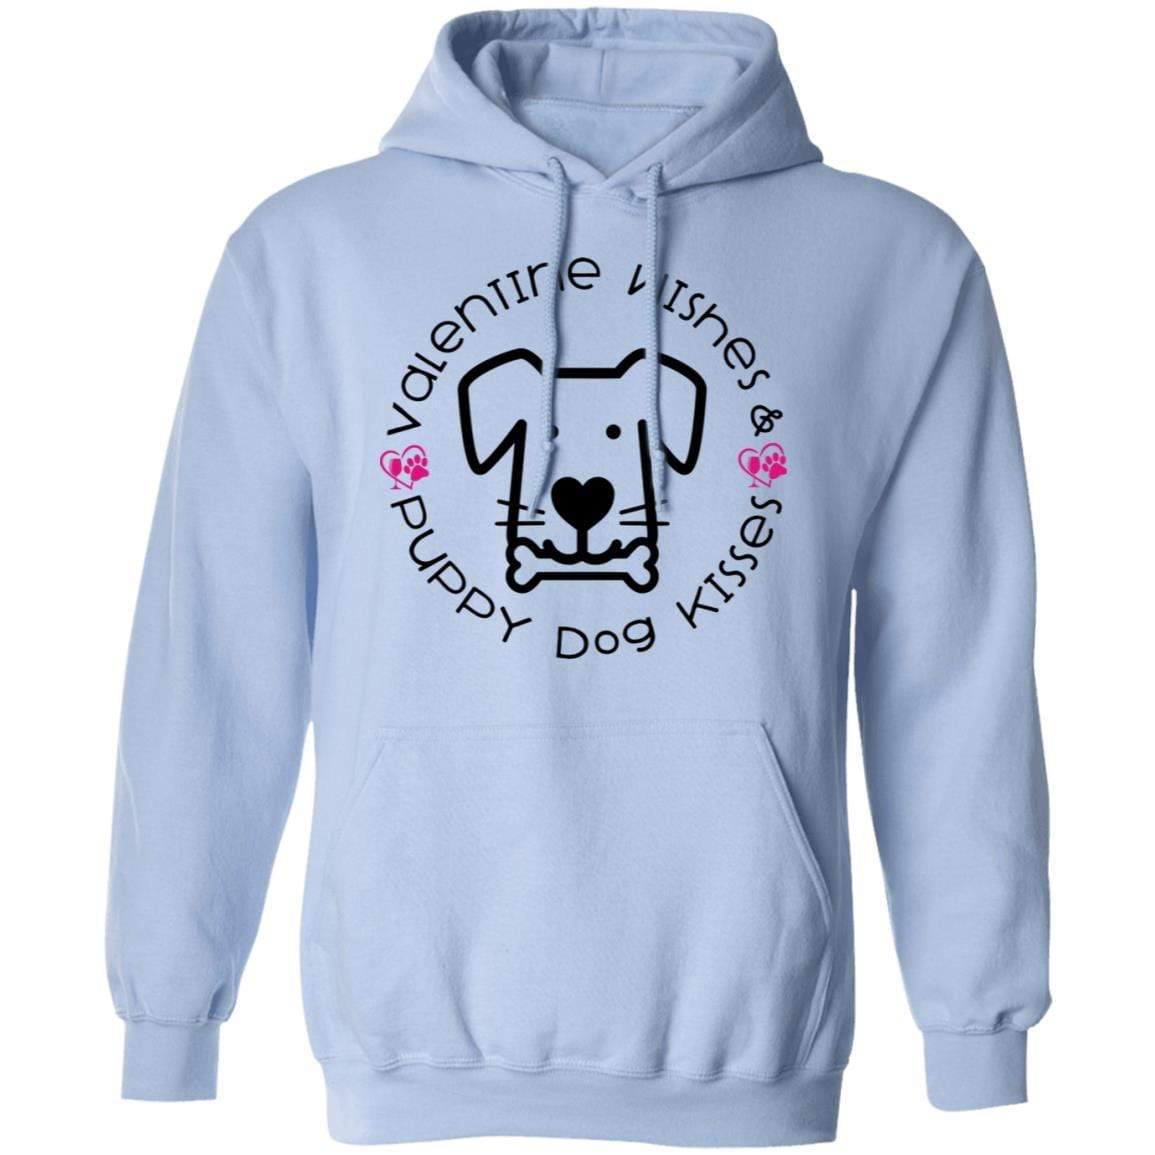 Sweatshirts Light Blue / S Winey Bitches Co Valentine Wishes and Puppy Dog Kisses" (Dog) Pullover Hoodie 8 oz. WineyBitchesCo